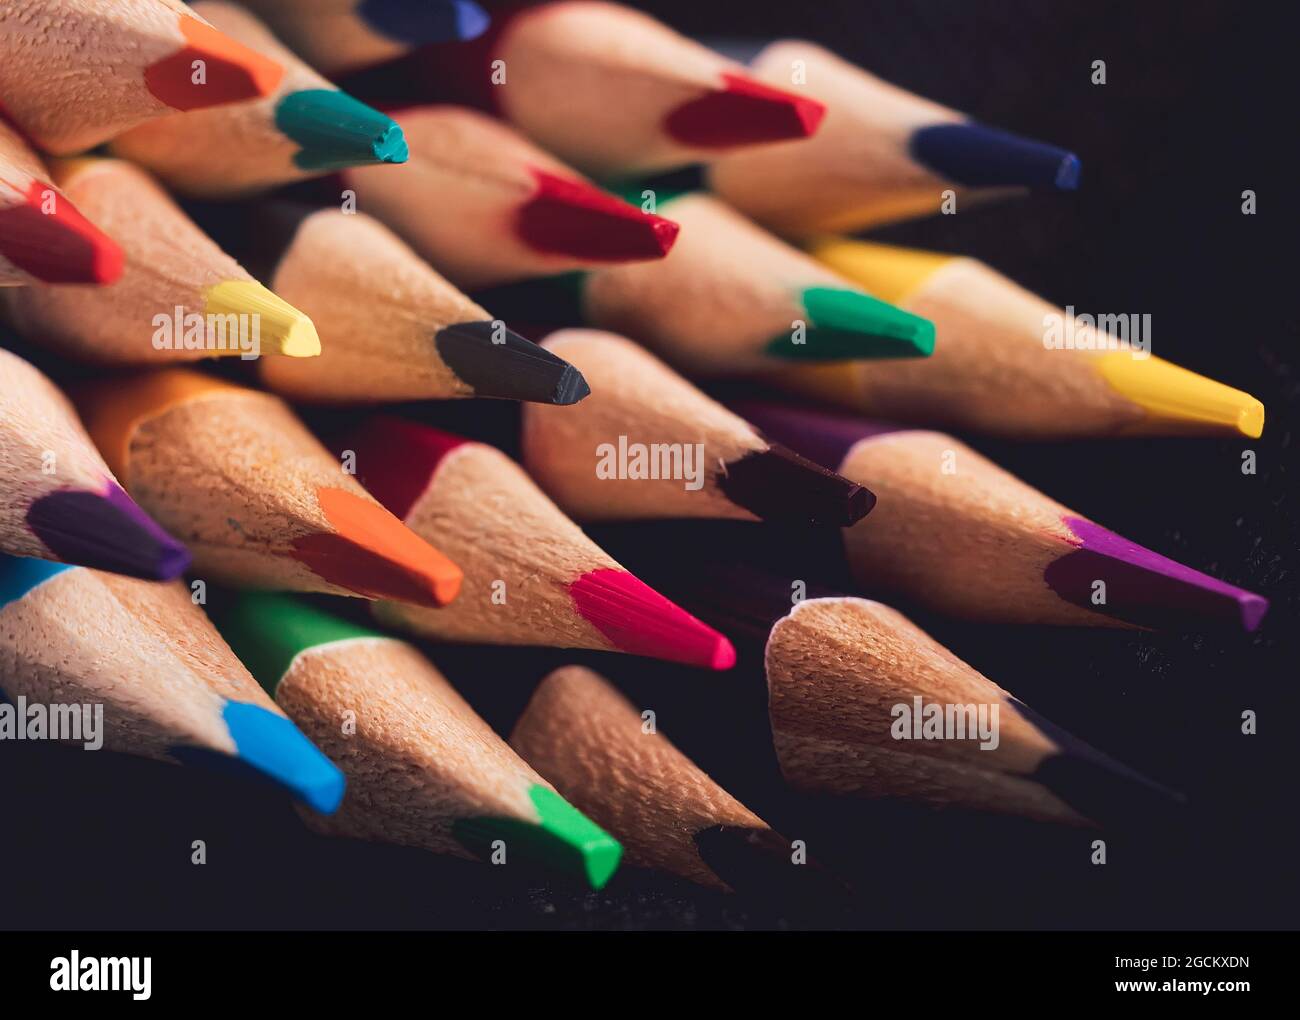 Abstract background for creativity. Lots of colored pencils on a dark background. Sharp tips of wooden pencils. Stock Photo